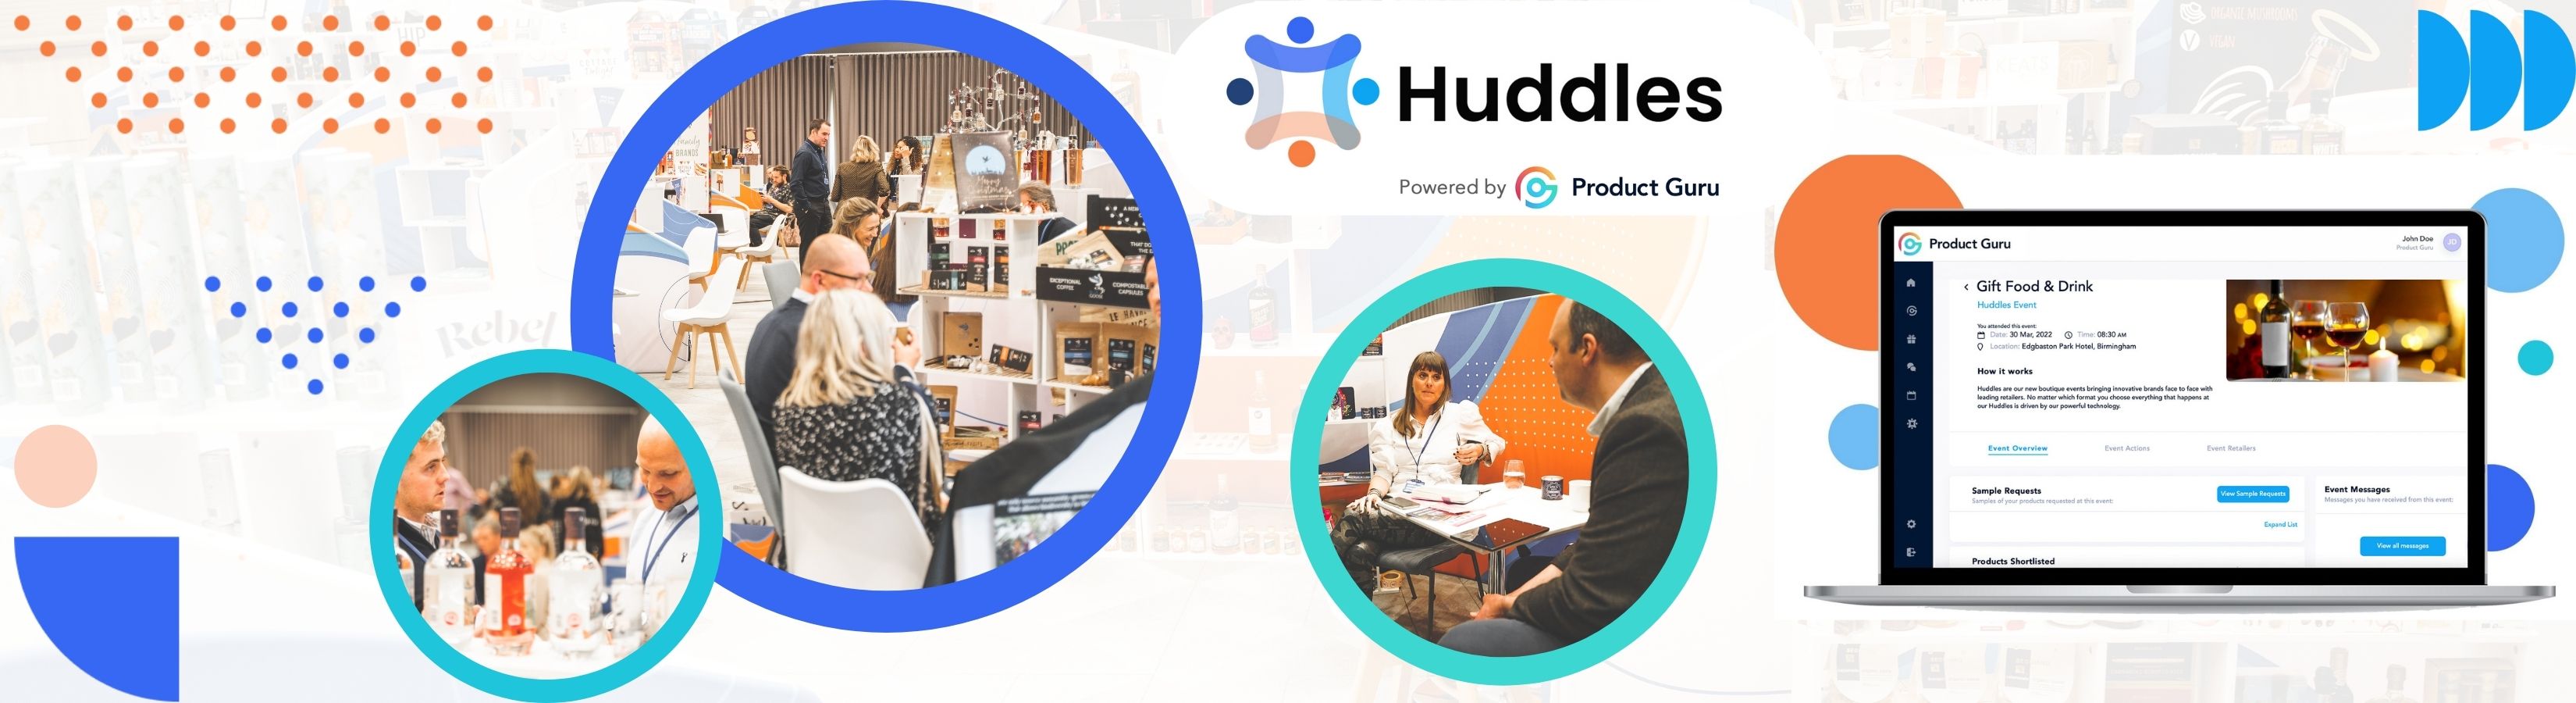 Huddles success story banner gorgeous good company